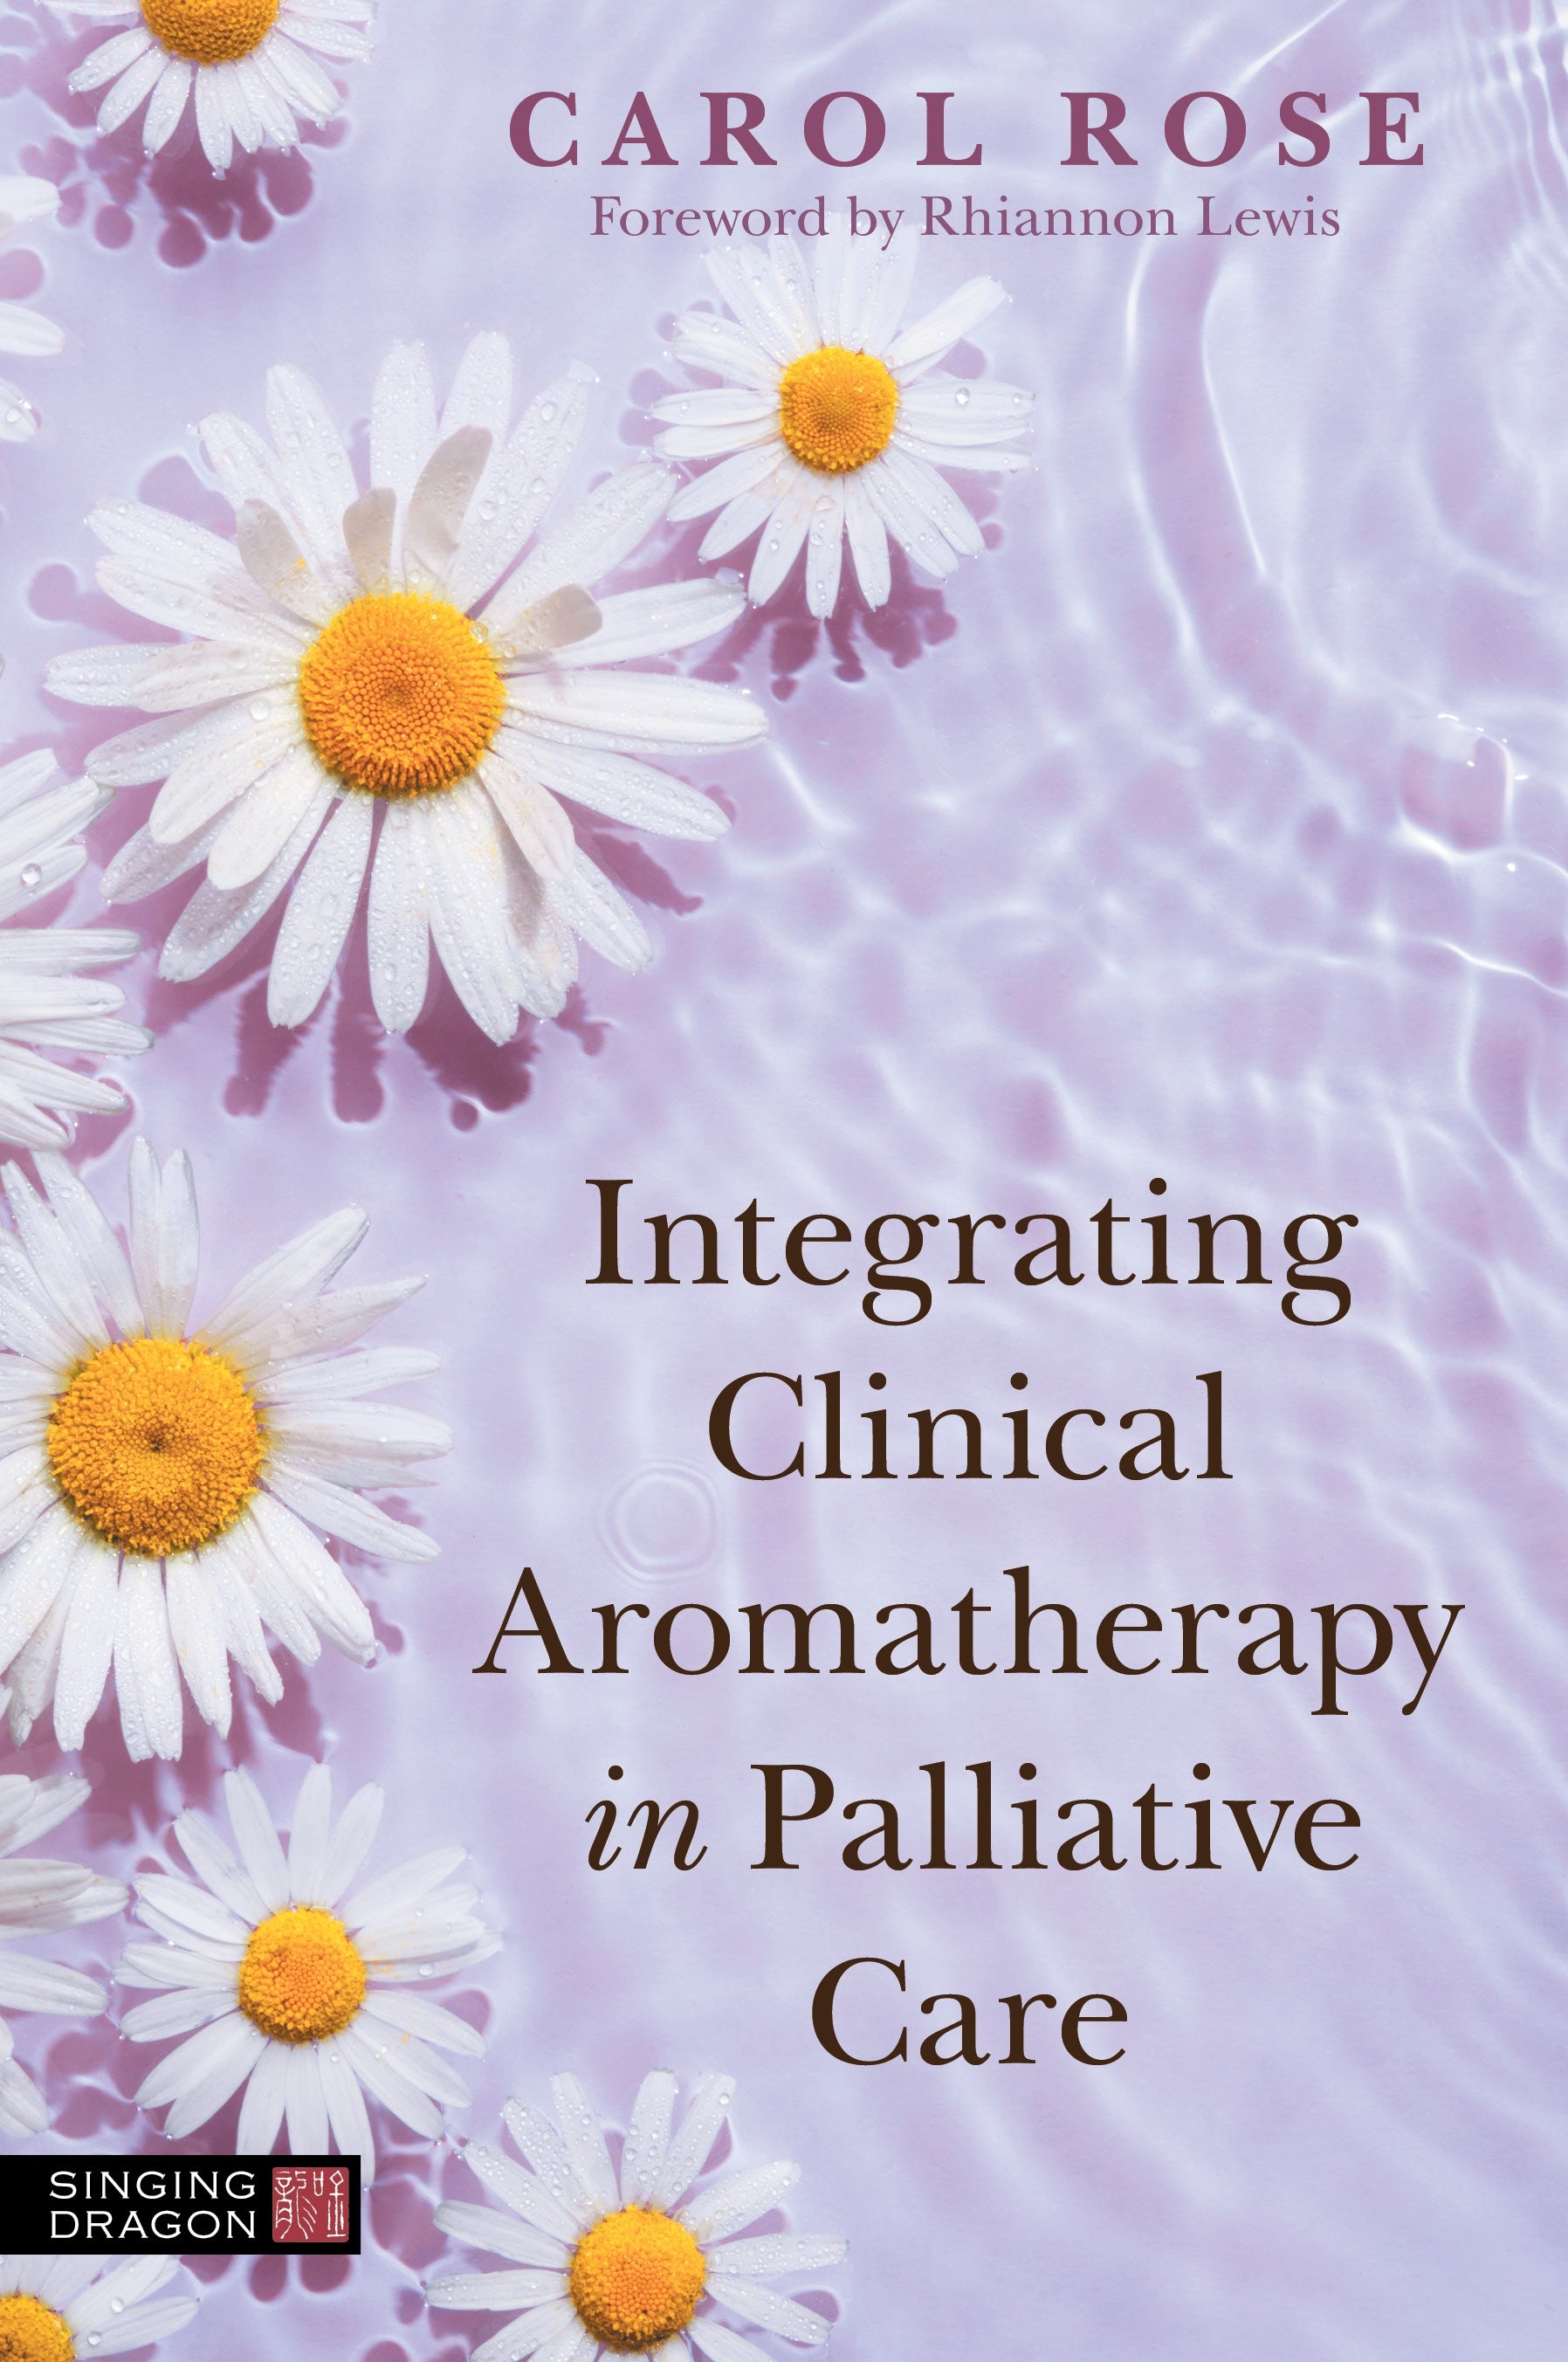 Integrating Clinical Aromatherapy in Palliative Care by Carol Rose, Rhiannon Lewis